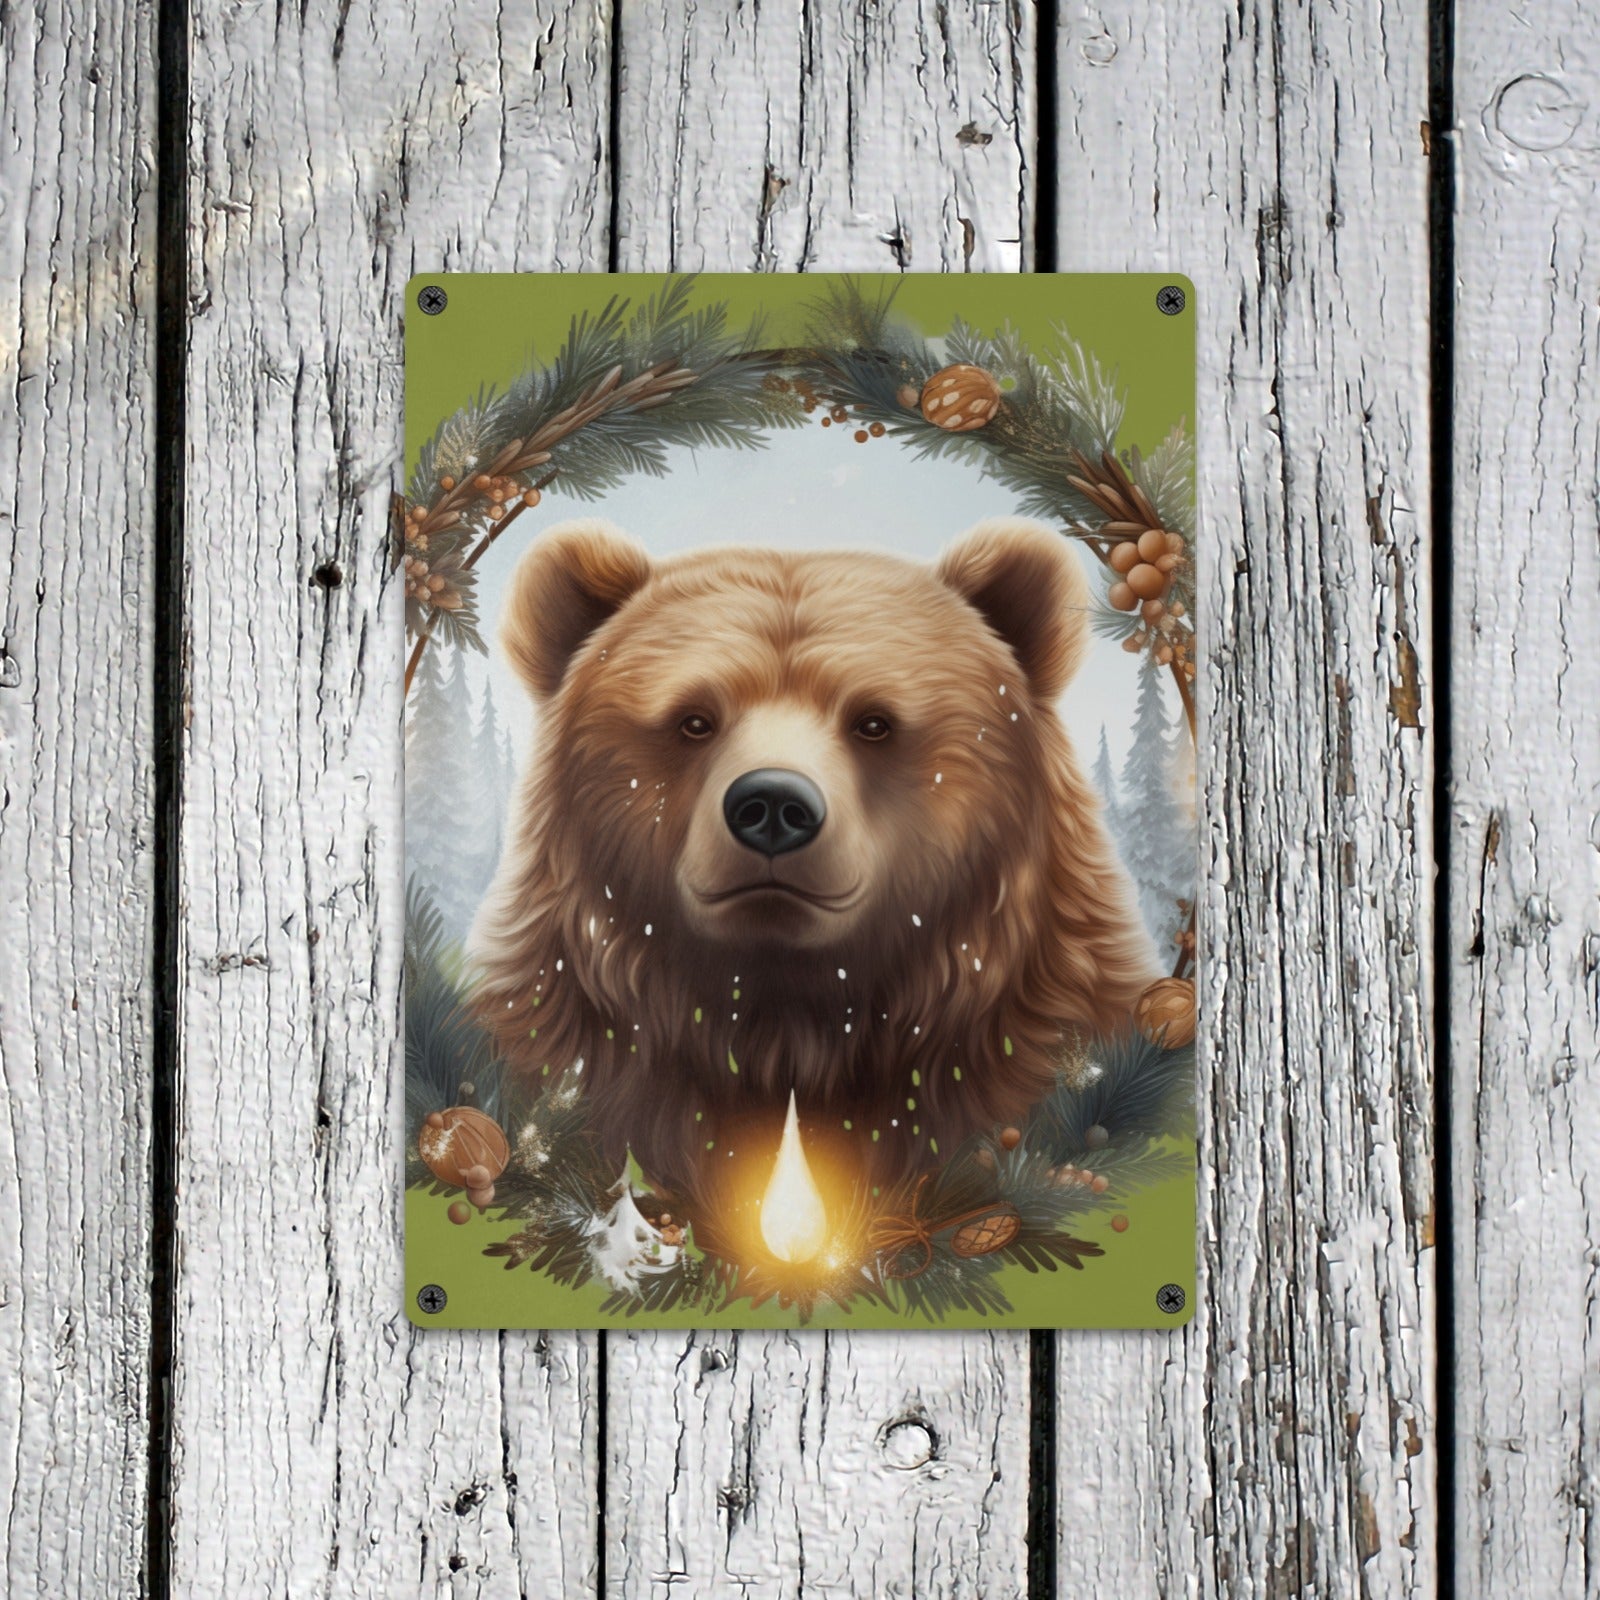 Rustic Bear Metal Sign - Christmas Cabin Decor | 12x16" Indoor/Outdoor Tin Sign by Cranberry Lake Designs